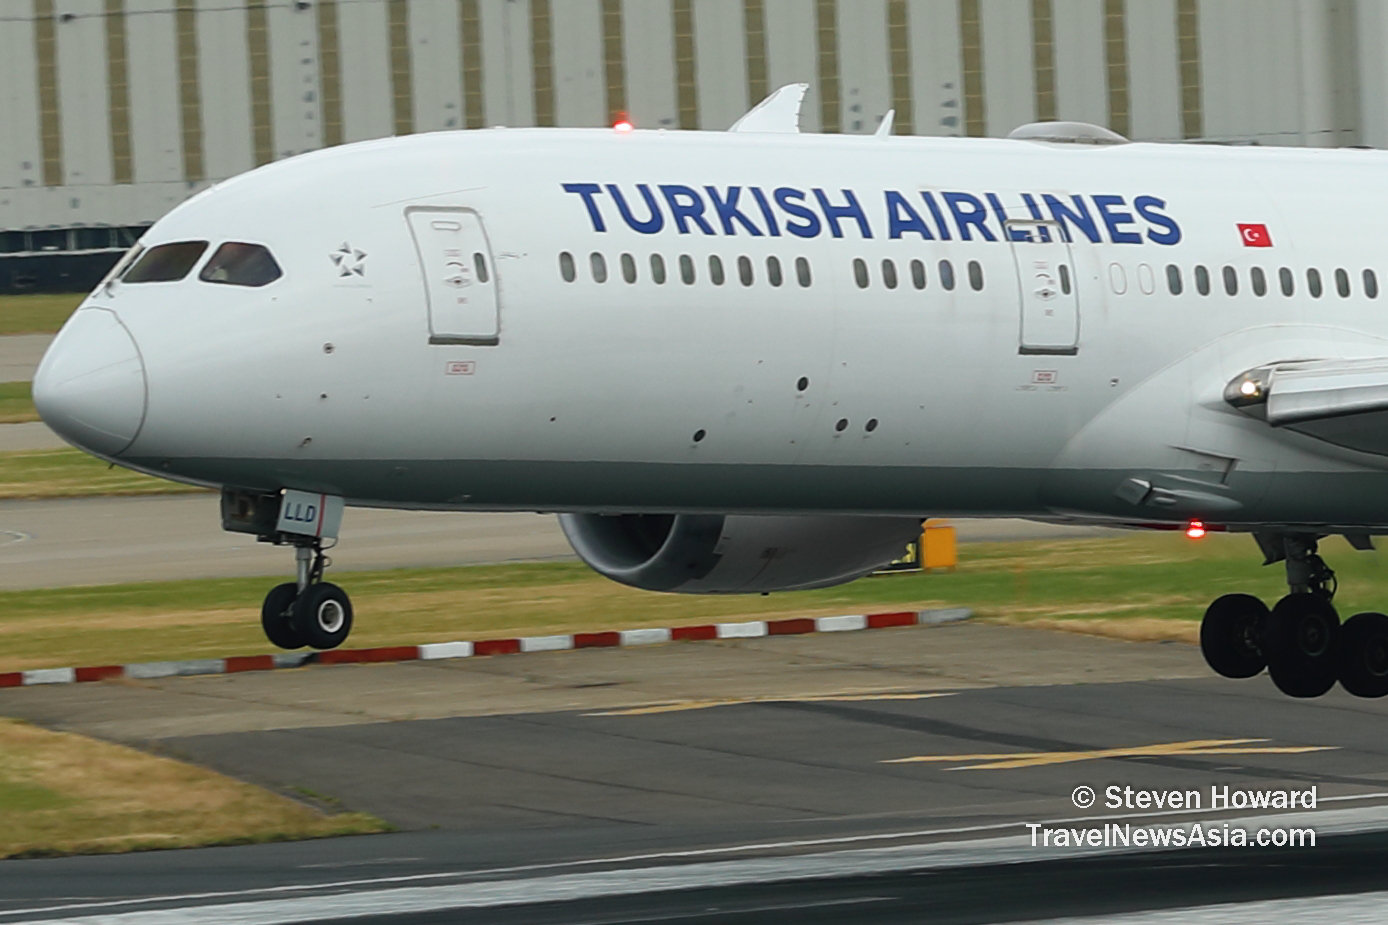 Turkish Airlines Boeing 787-9 reg: TC-LLD landing at LHR in June 2023. Picture by Steven Howard of TravelNewsAsia.com Click to enlarge.